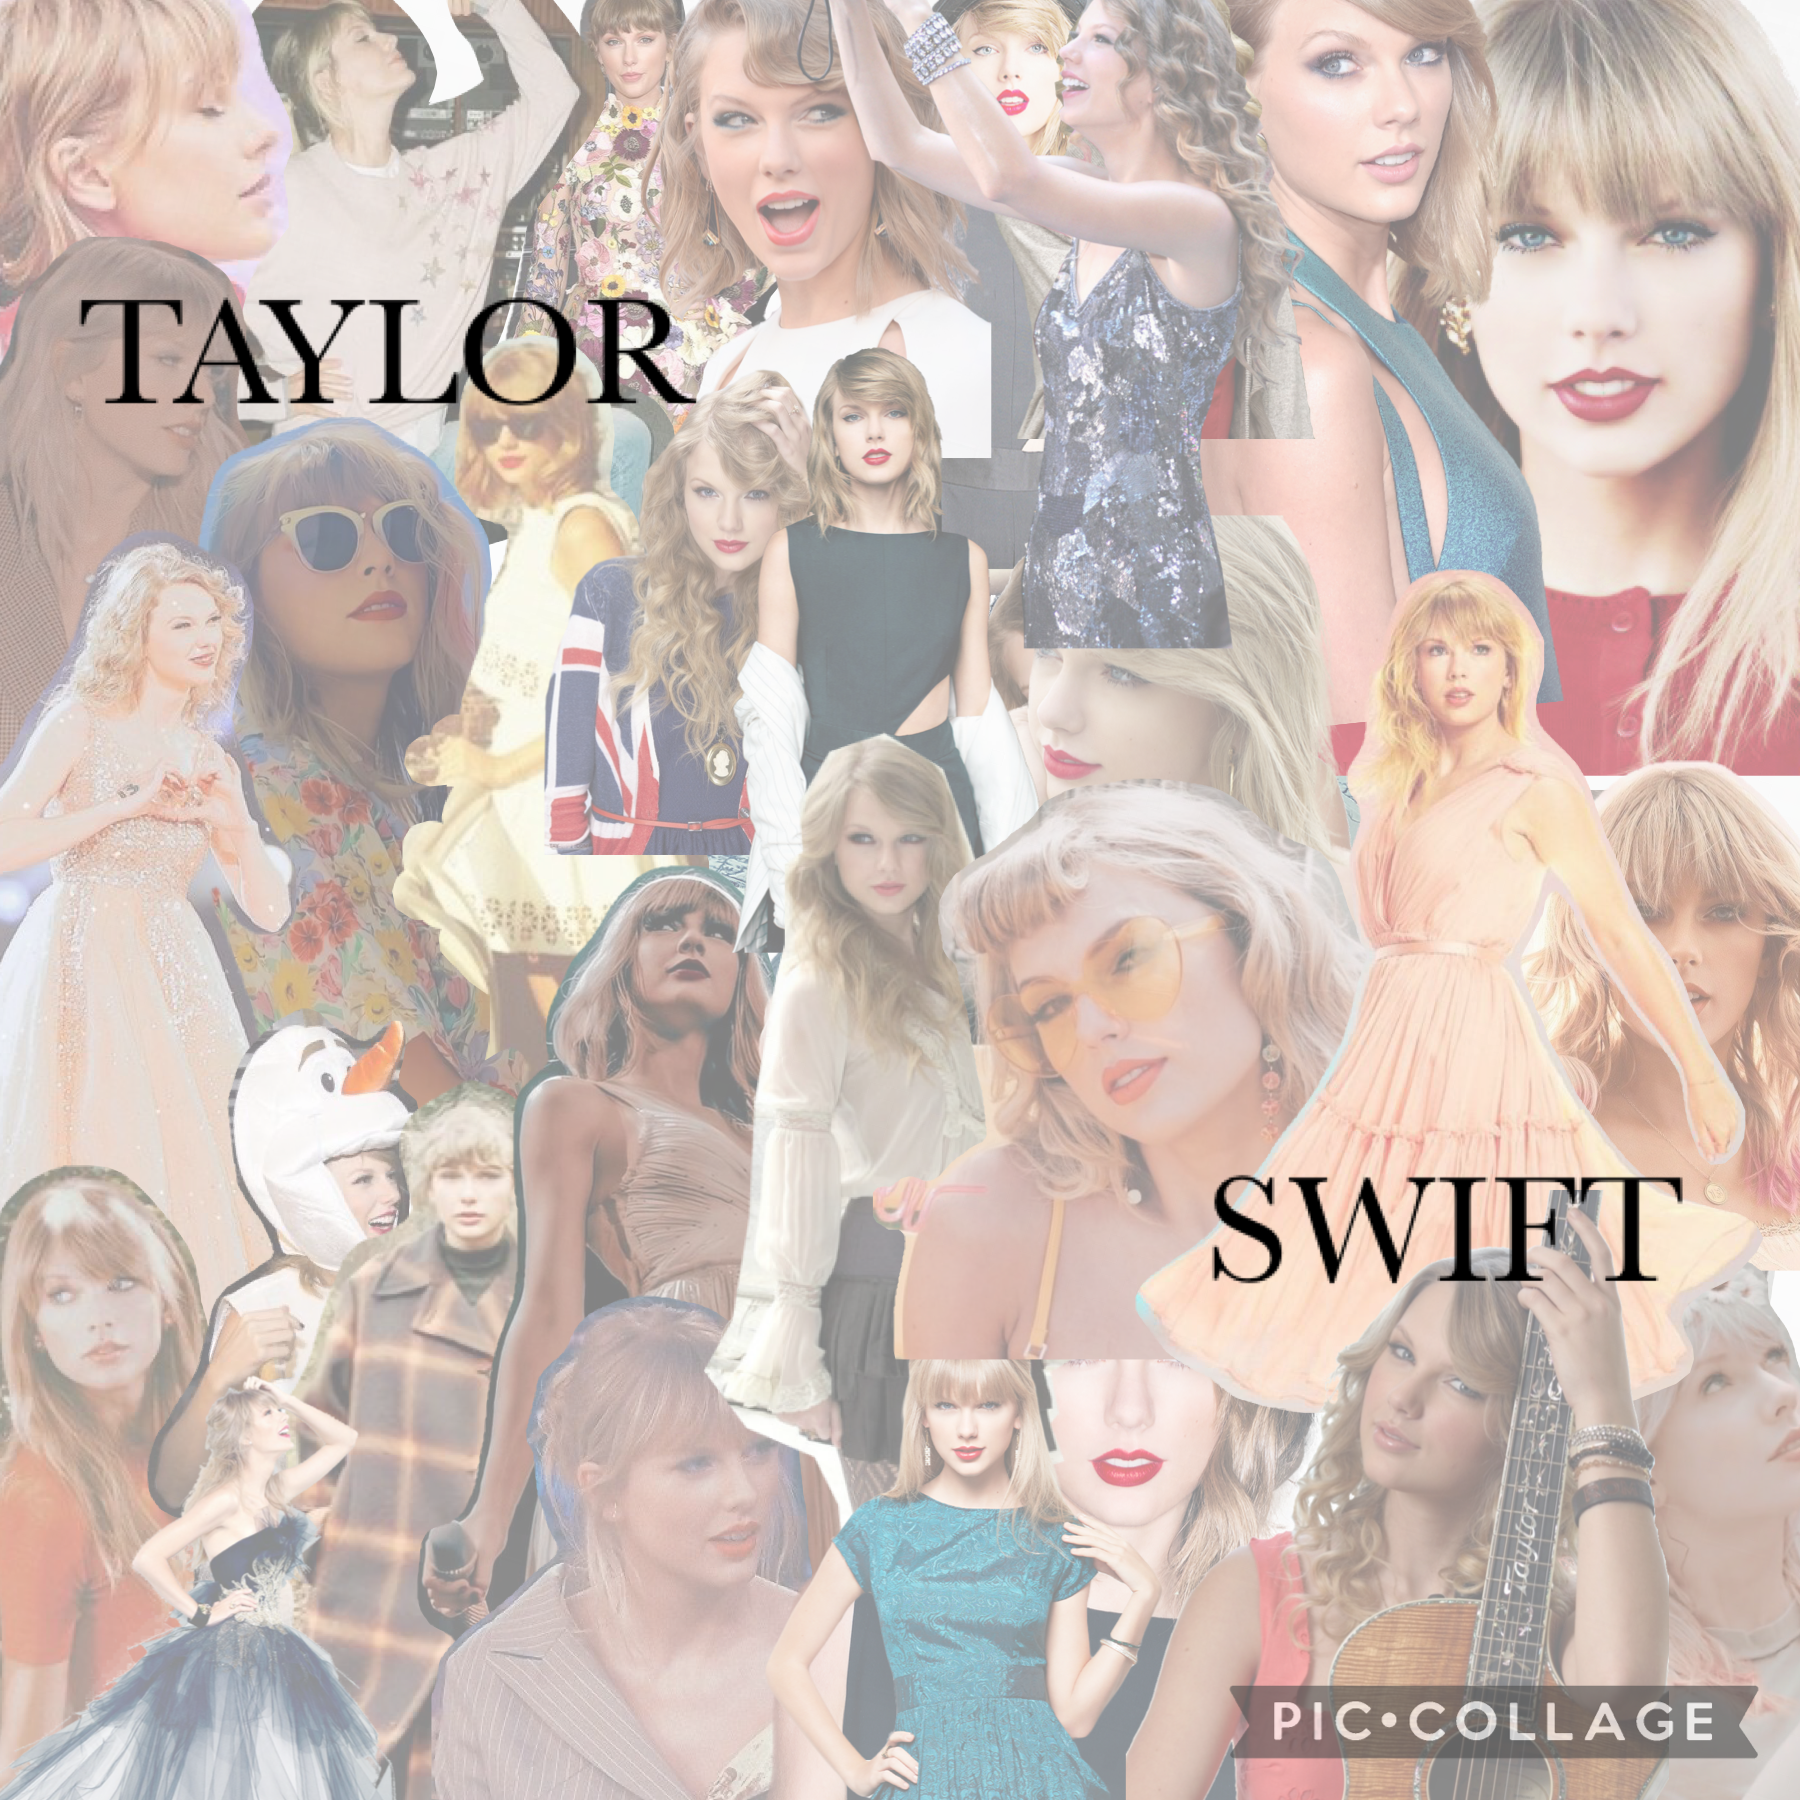 taylor swift collage :) requested by 
golden-sunshine 
hope everyone is having a great day <3
i have 3 more singer collages to do and then i’ll move on to another series
check comments for rest of caption